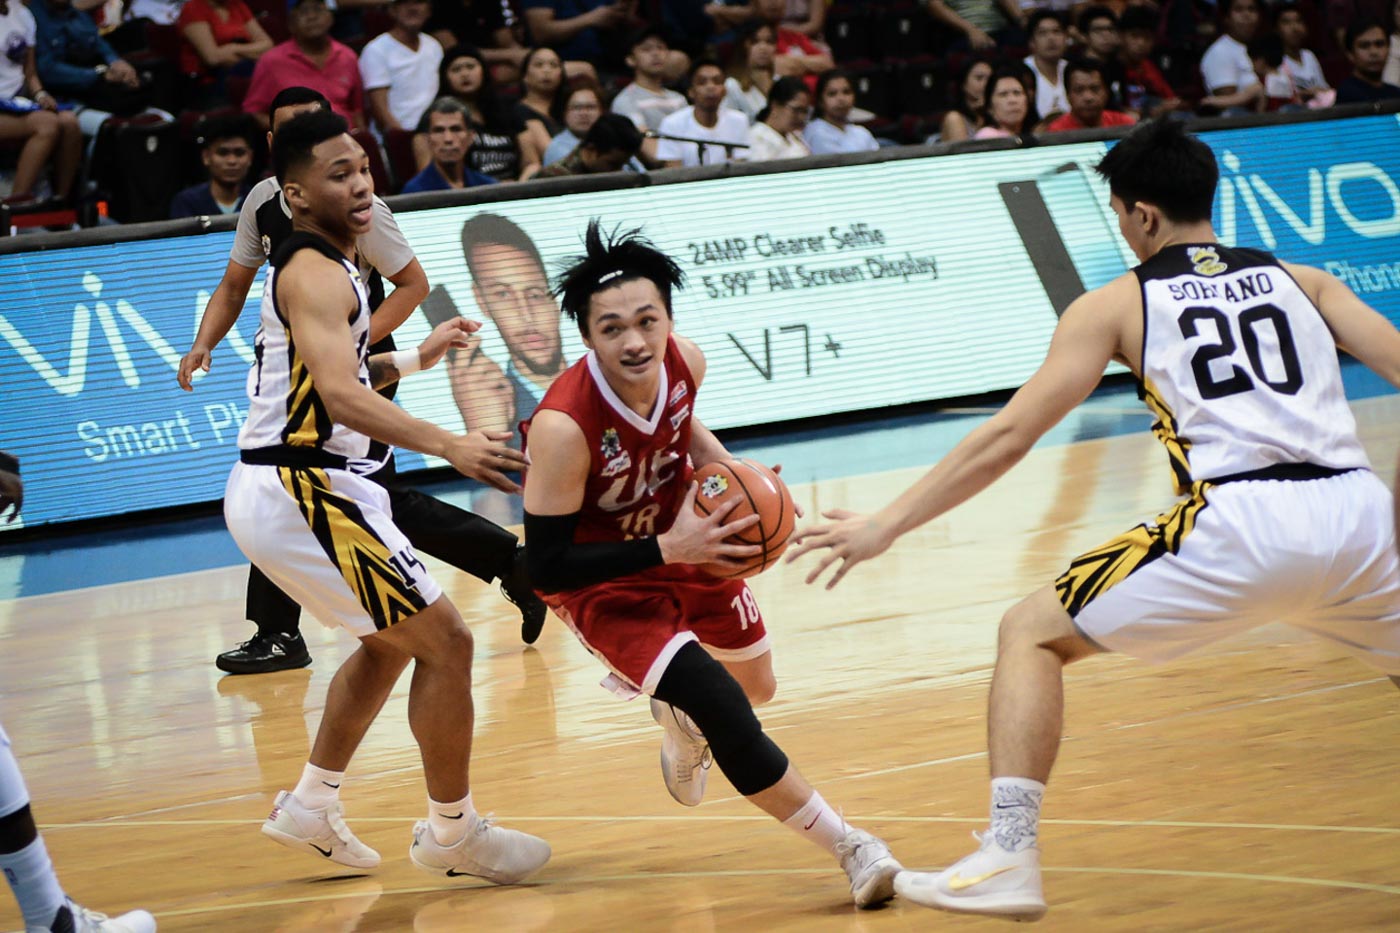 RED HOT. Philip Manalang scored a career-high 20 points in the win over UST as the UE Red Warriors continue riding high off the momentum of their near-upset of La Salle. Photo by Josh Albelda/Rappler   